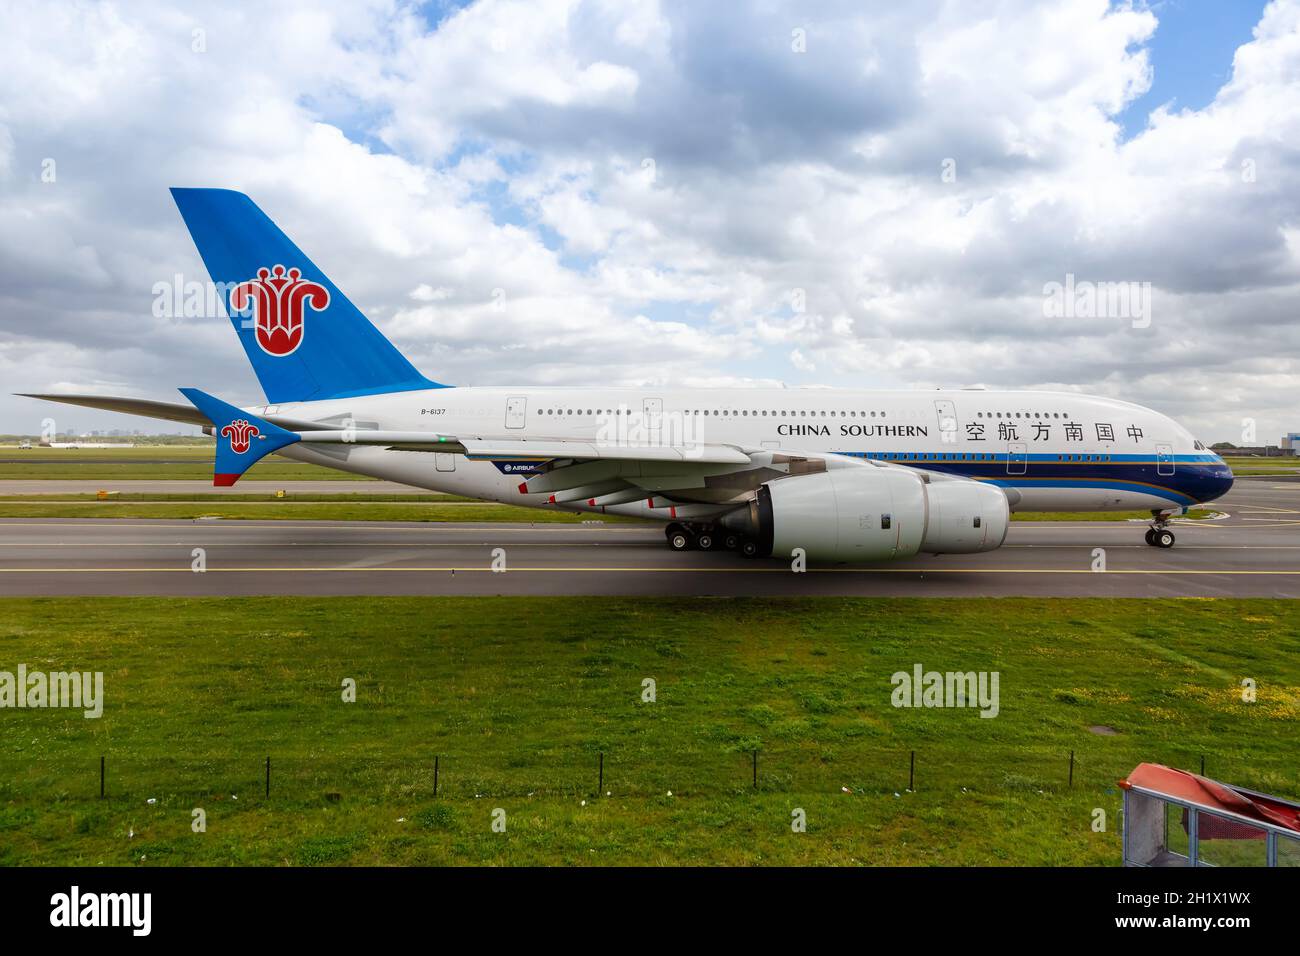 Amsterdam, Netherlands - May 21, 2021: China Southern Airlines Airbus A380-800 airplane at Amsterdam Schiphol airport (AMS) in the Netherlands. Stock Photo